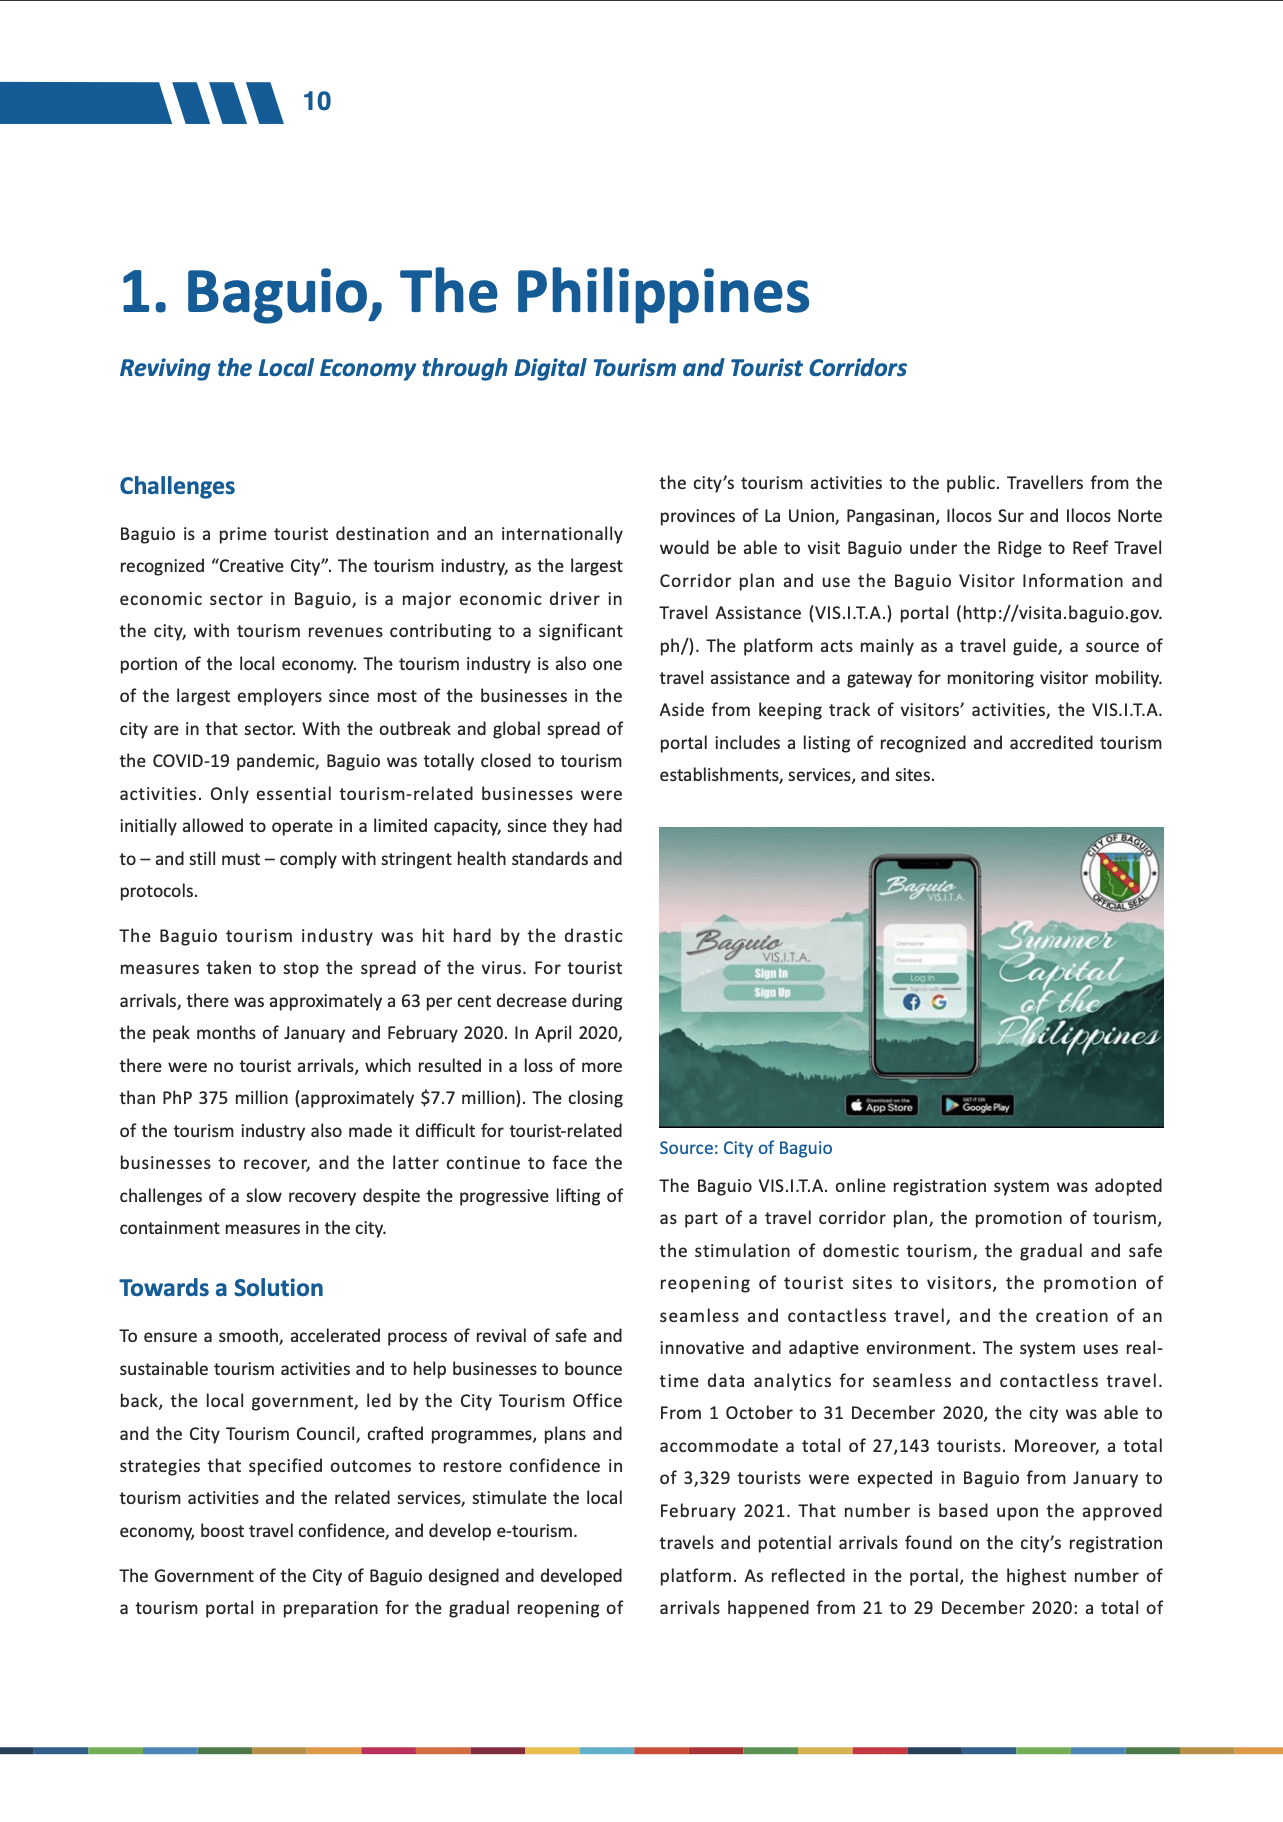 Reviving the Local Economy through Digital Tourism and Tourist Corridors – Baguio, The Philippines